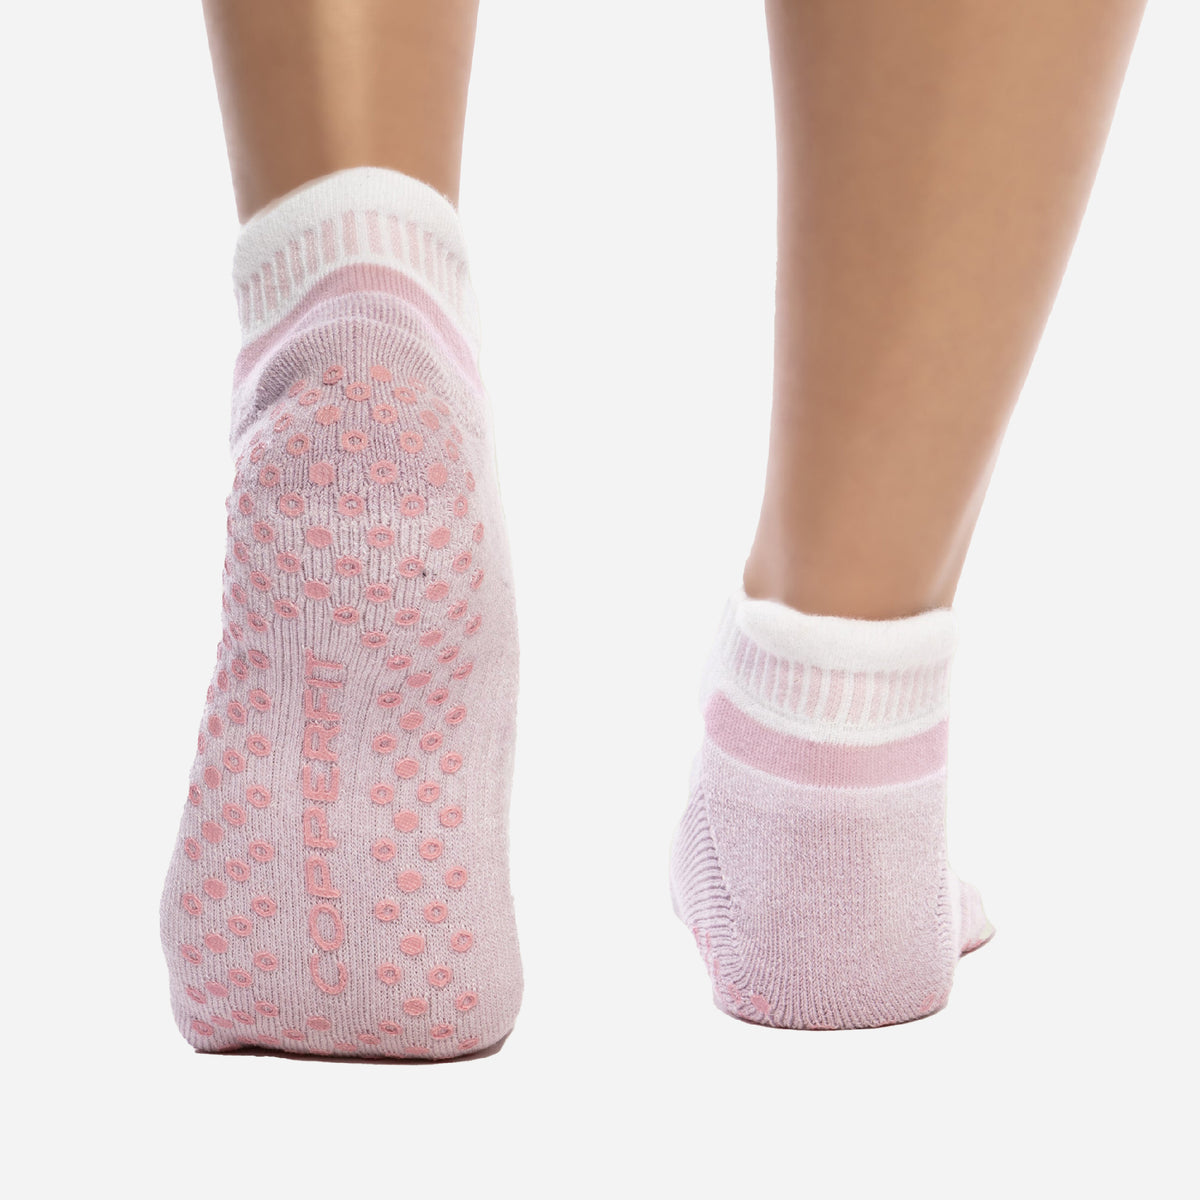 Grip Socks Woman - Socks With Grips,Elastic Comfortable Moisture-Wicking  Warm Gripper Socks For Home Workout Pregnancy Jvan : : Clothing,  Shoes & Accessories